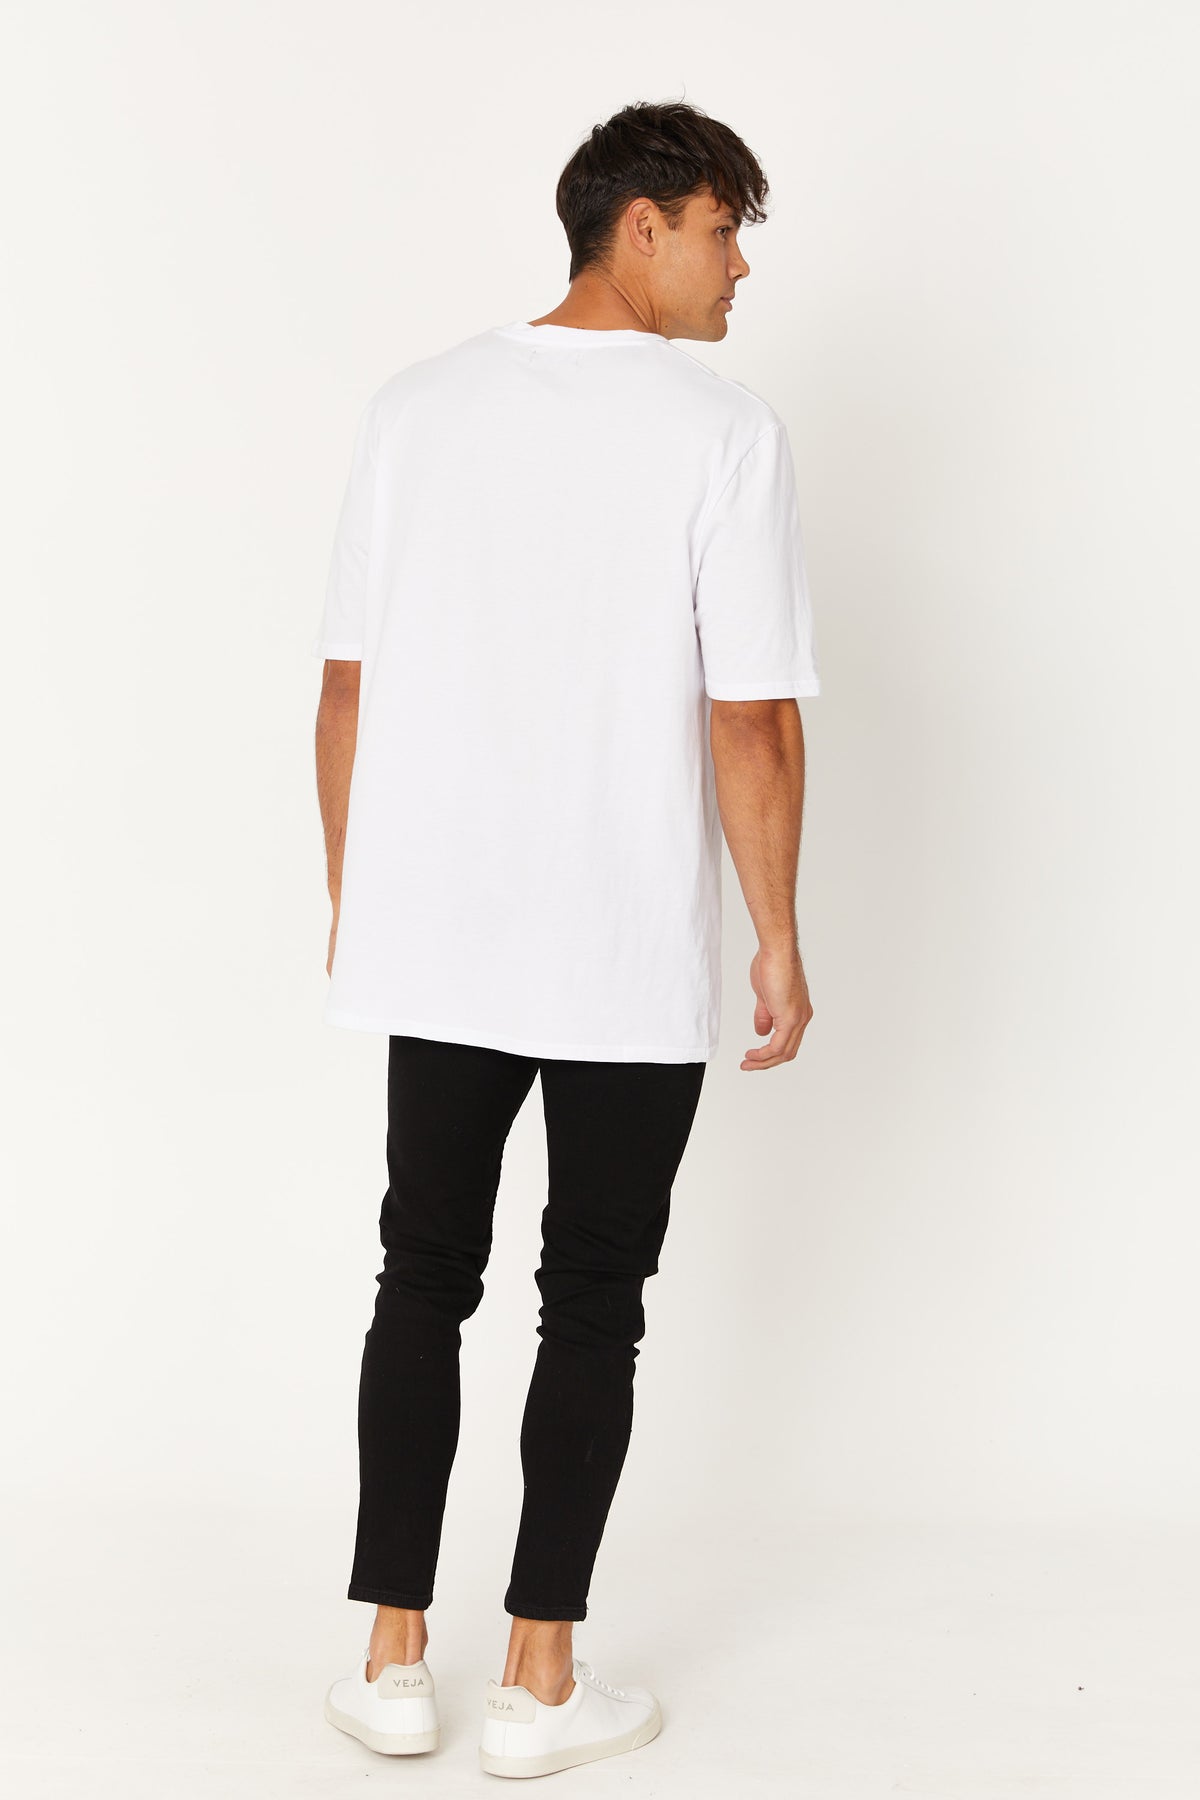 Washed Tee Sampson Melbourne White